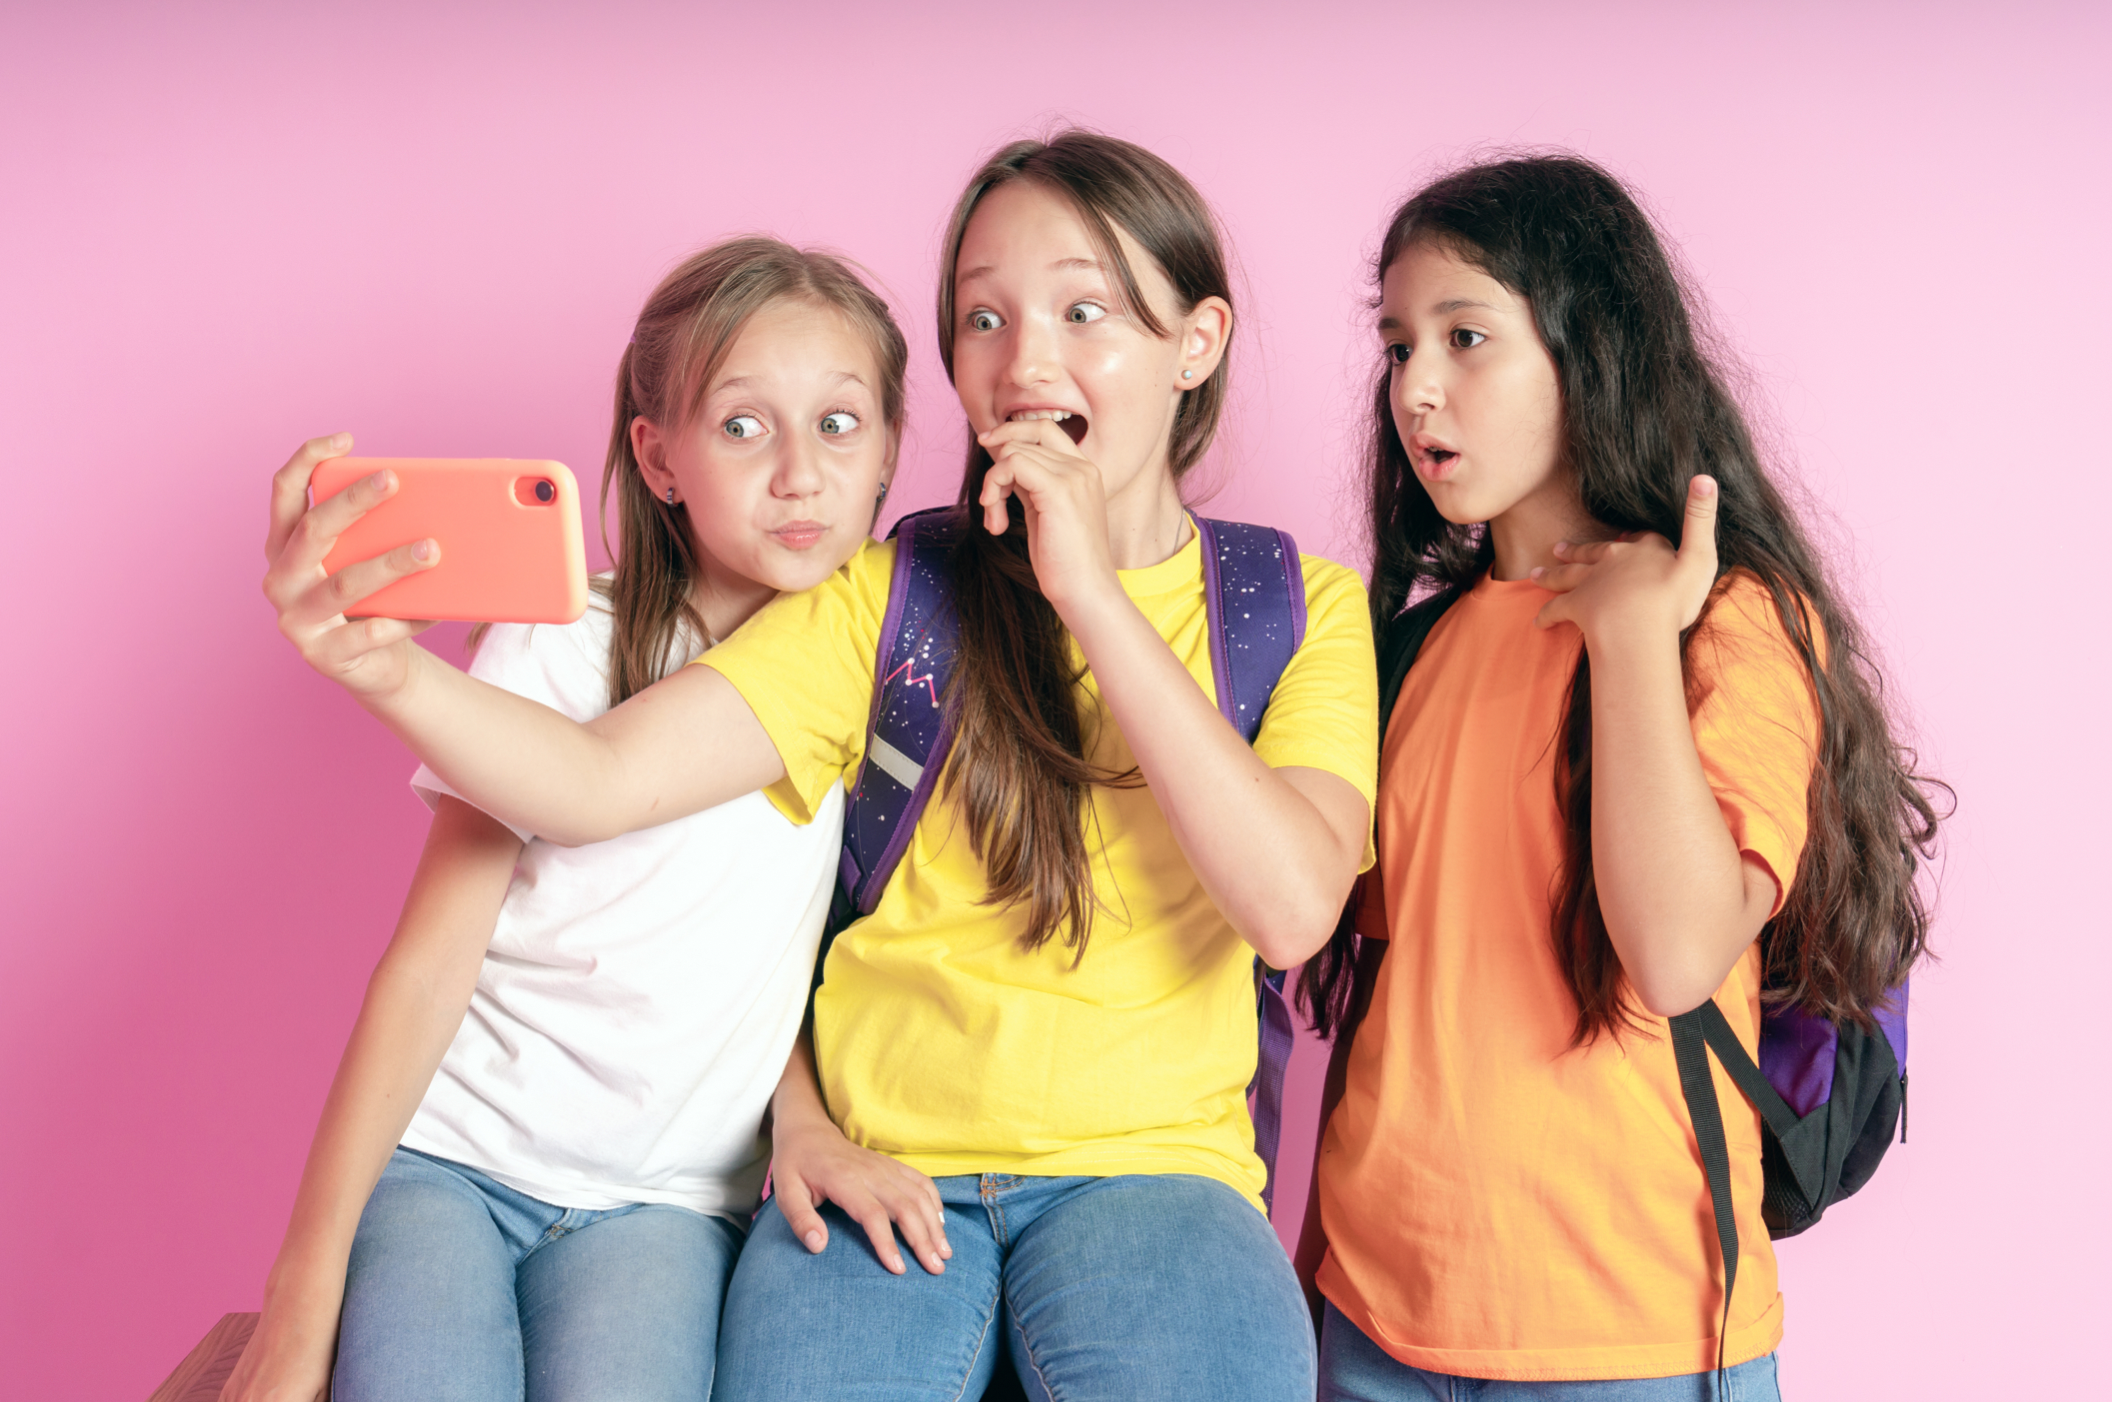 Three young girls pose in front of their phone camera